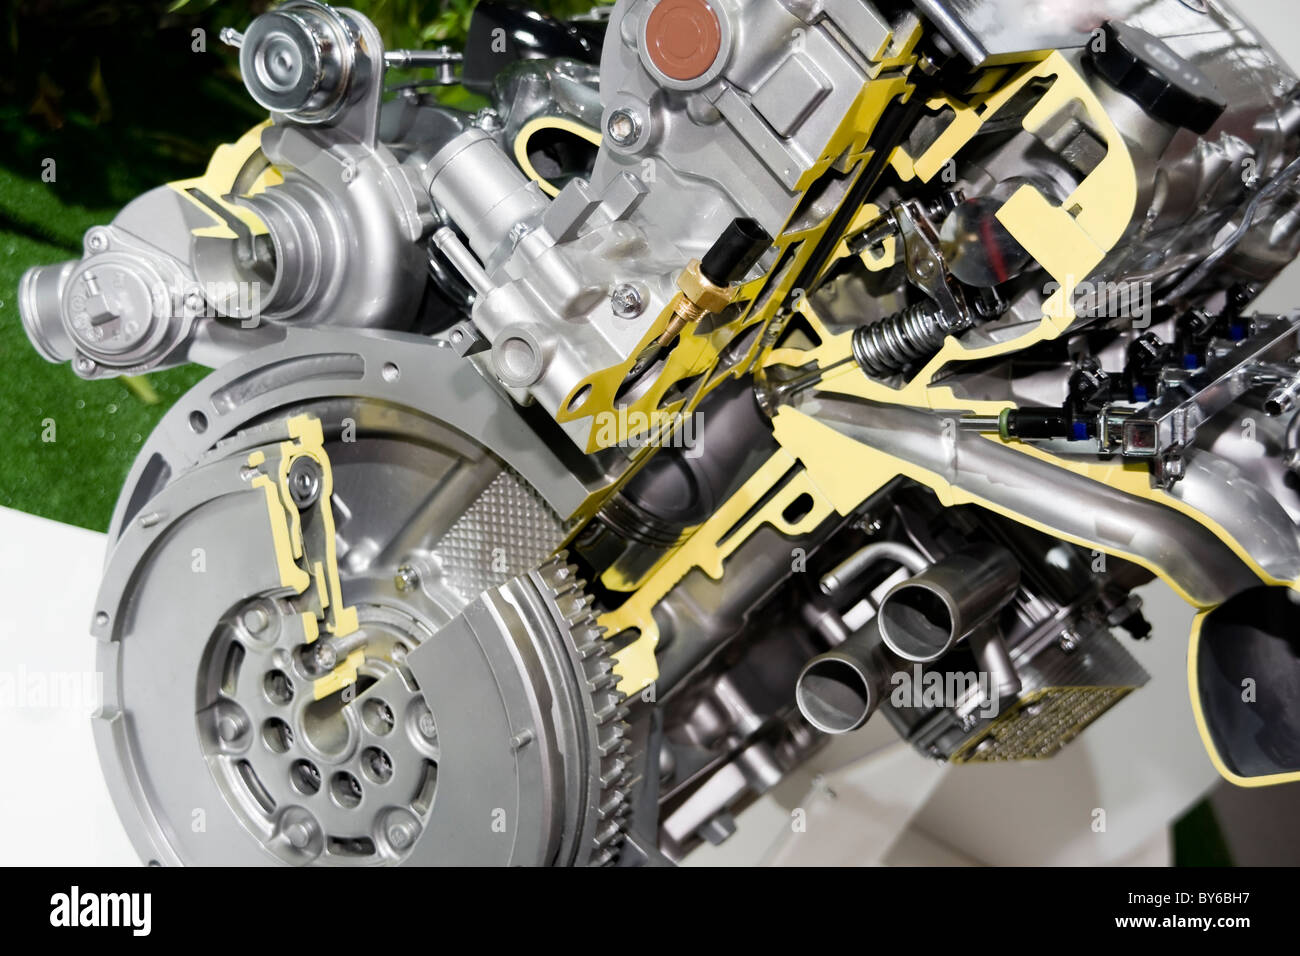 Complex engine of modern car interior view Stock Photo